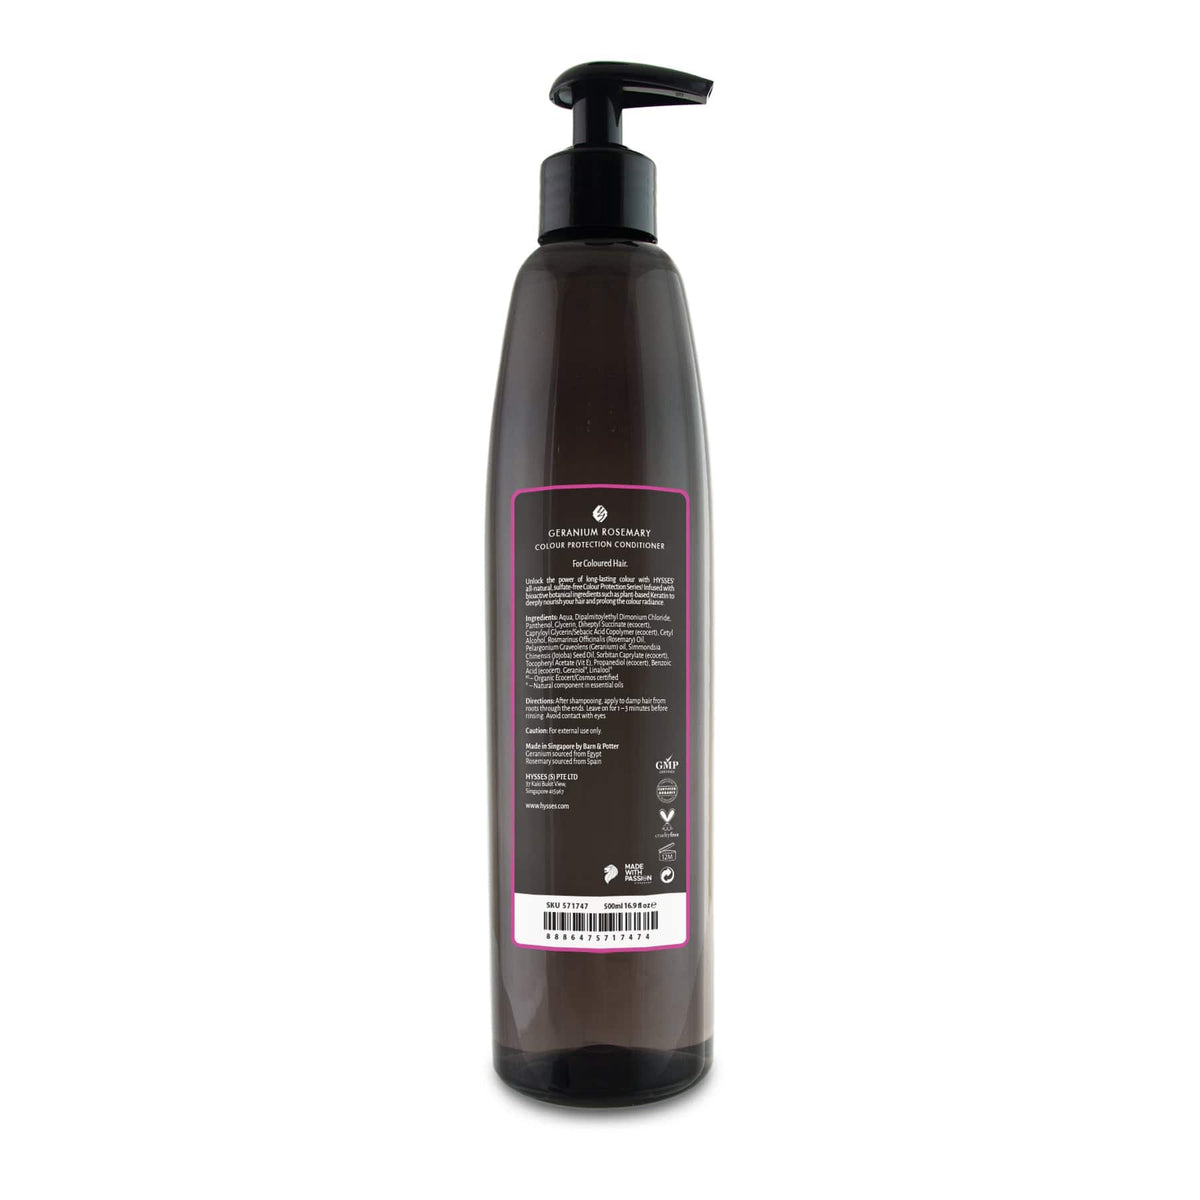 Hysses Hair Care Colour Protection Conditioner, Geranium Rosemary